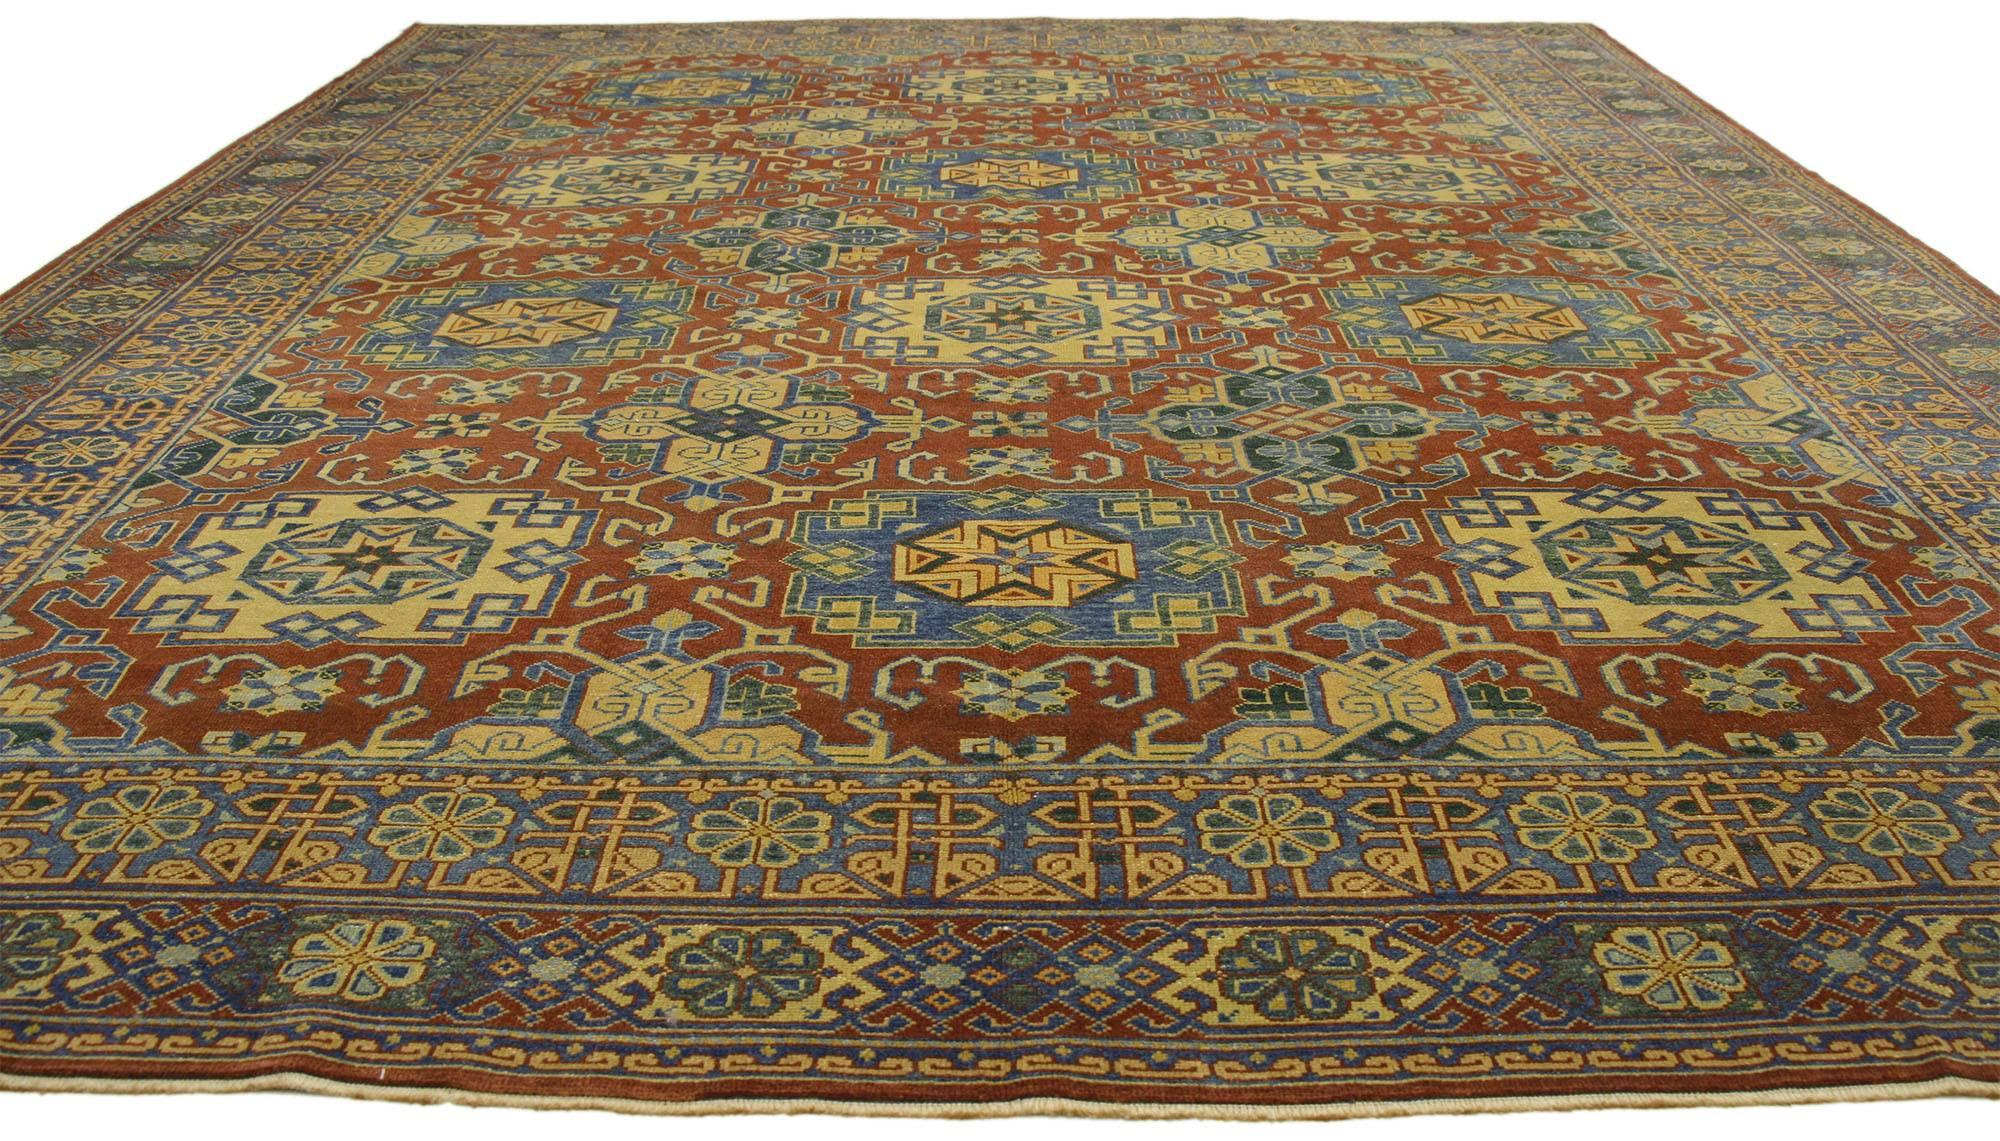 77113 vintage Turkish Oushak rug with modern Luxe style and bold art deco design. Combining hard angles, a bold geometric pattern, and symmetry, this hand knotted wool vintage Turkish Oushak rug embodies true Art Deco Period Style. It features